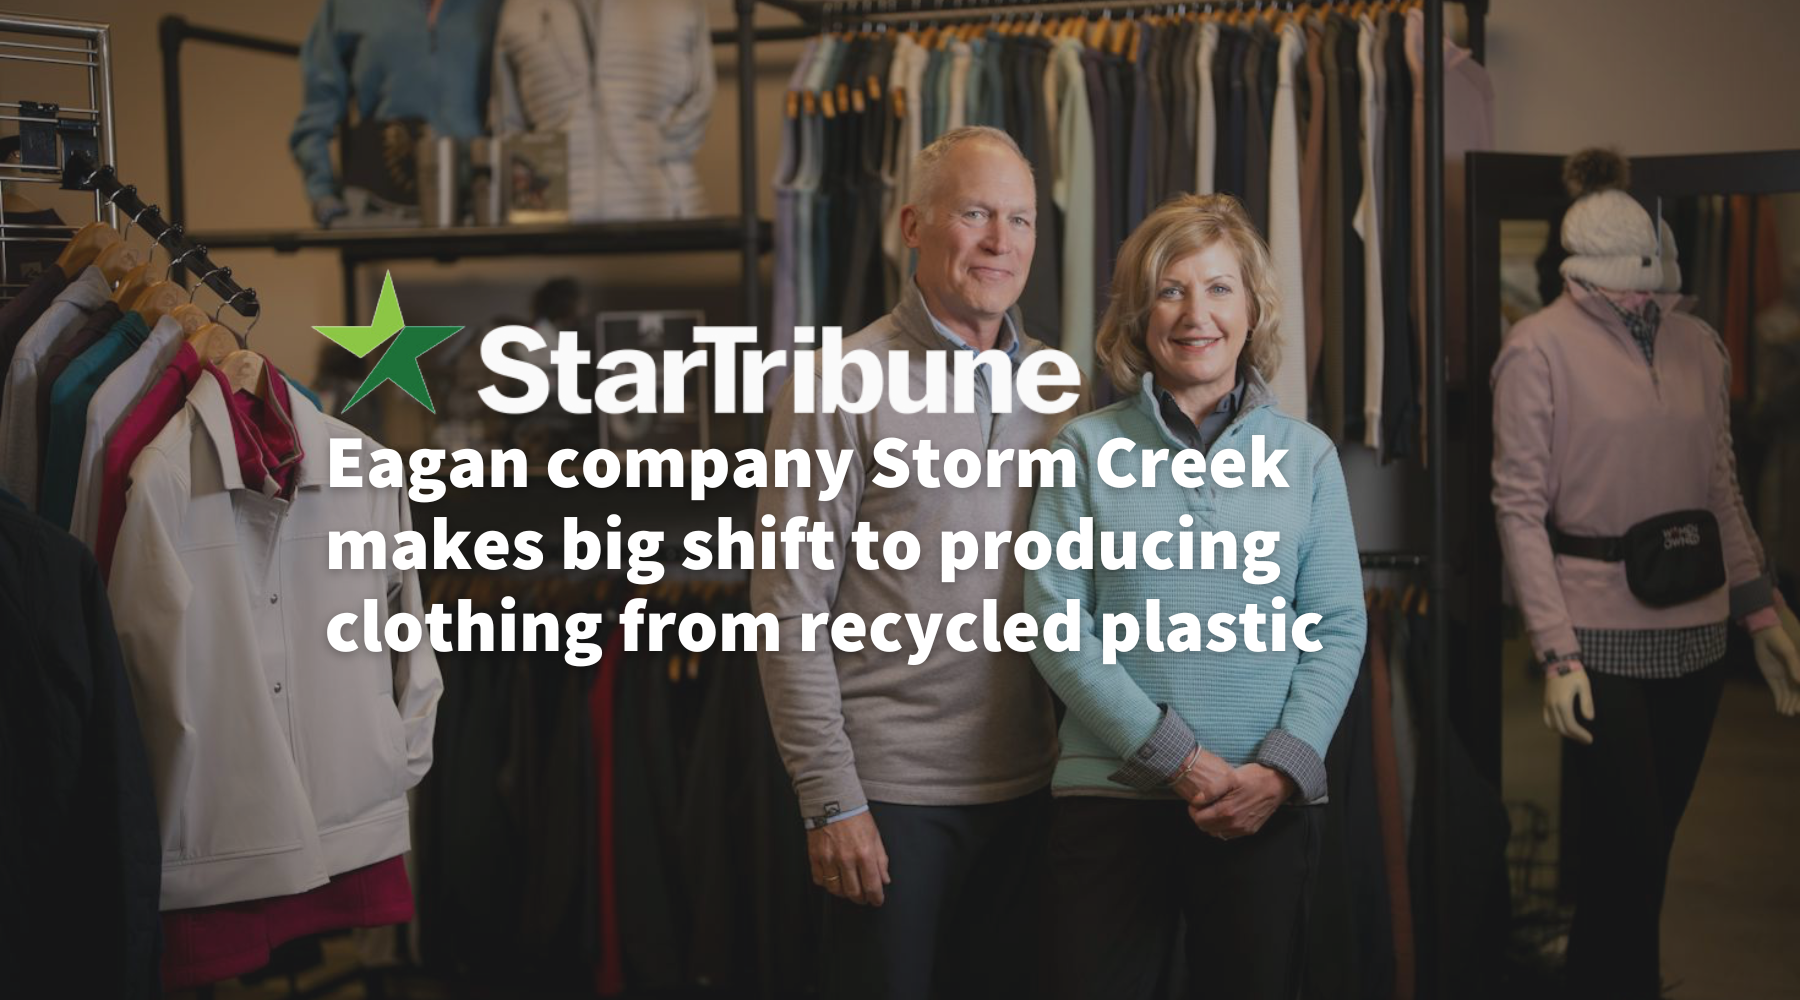 As Seen In the Star Tribune: Eagan company Storm Creek makes big shift to producing clothing from recycled plastic